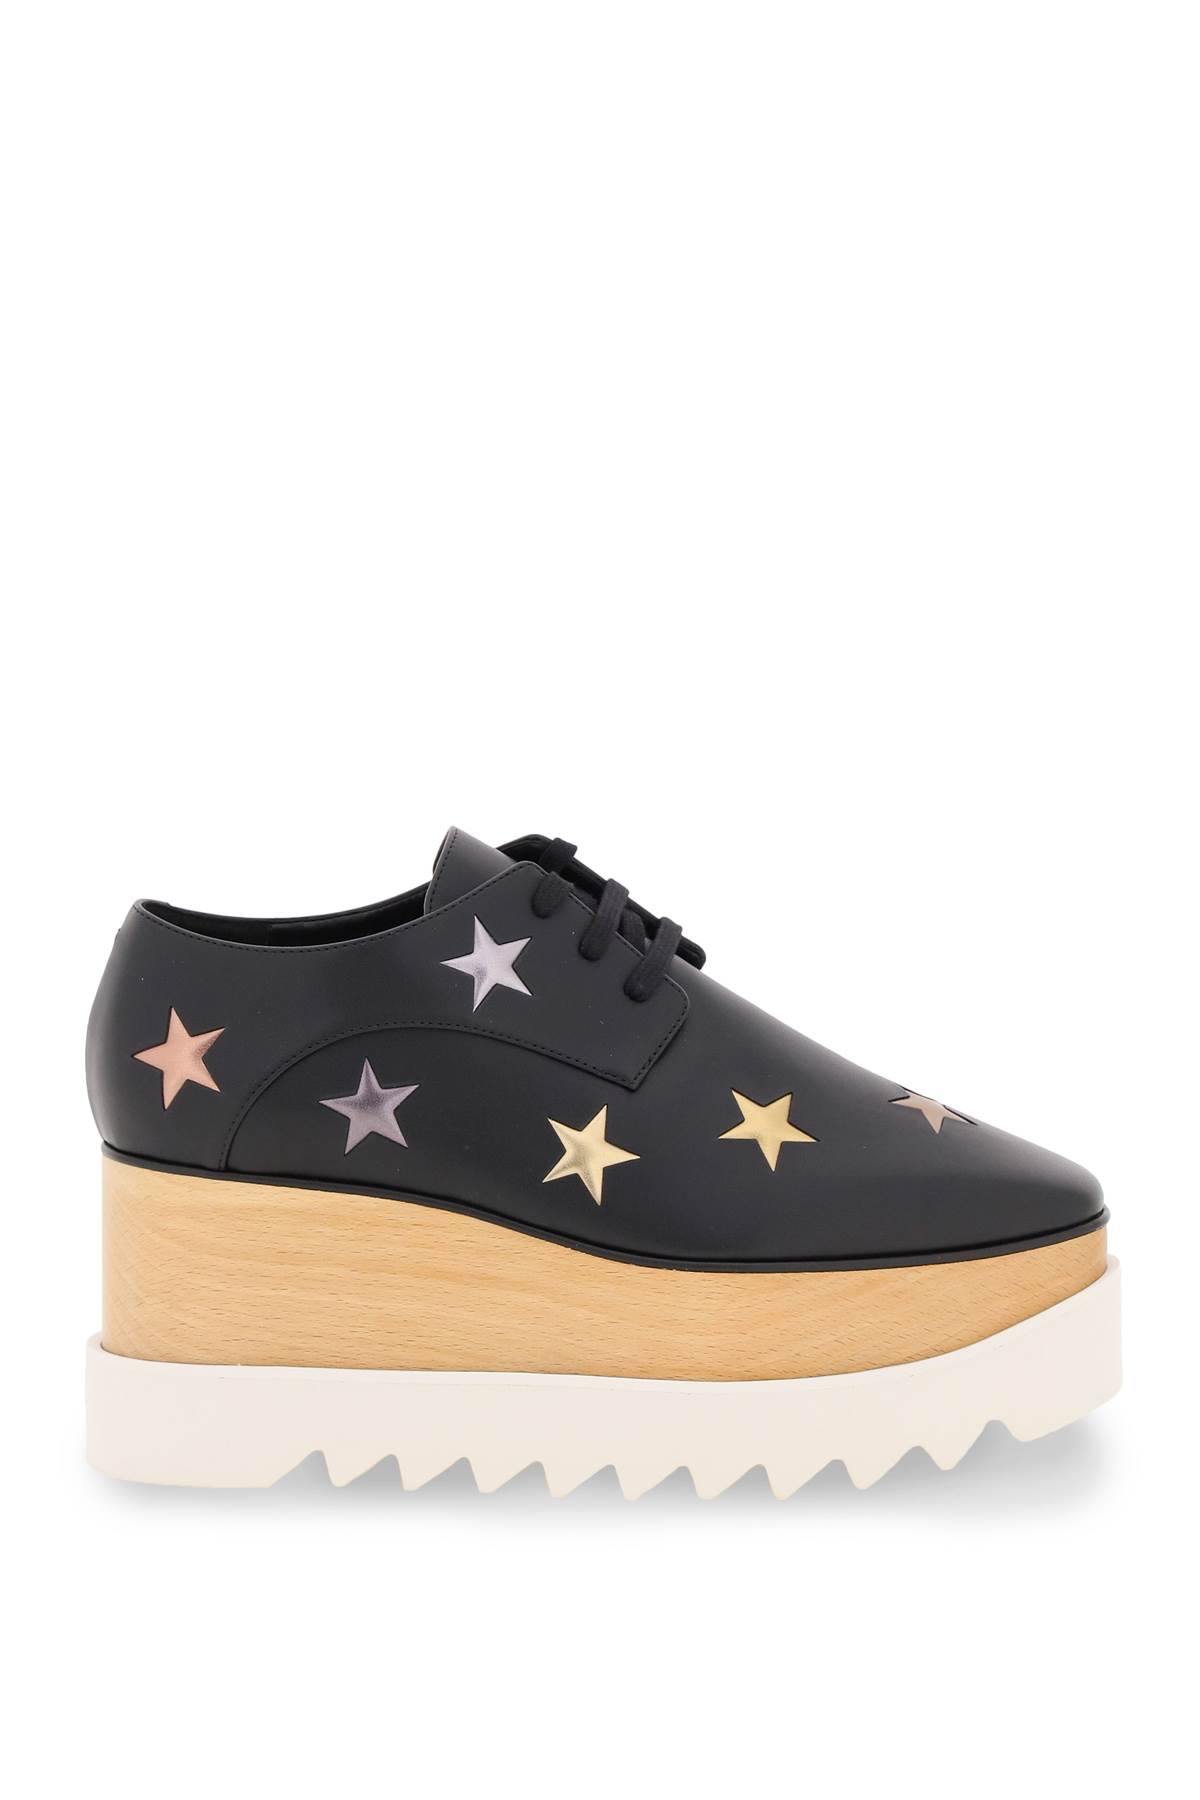 Stella McCartney Elyse Lace-up Shoes With Stars | italist, ALWAYS